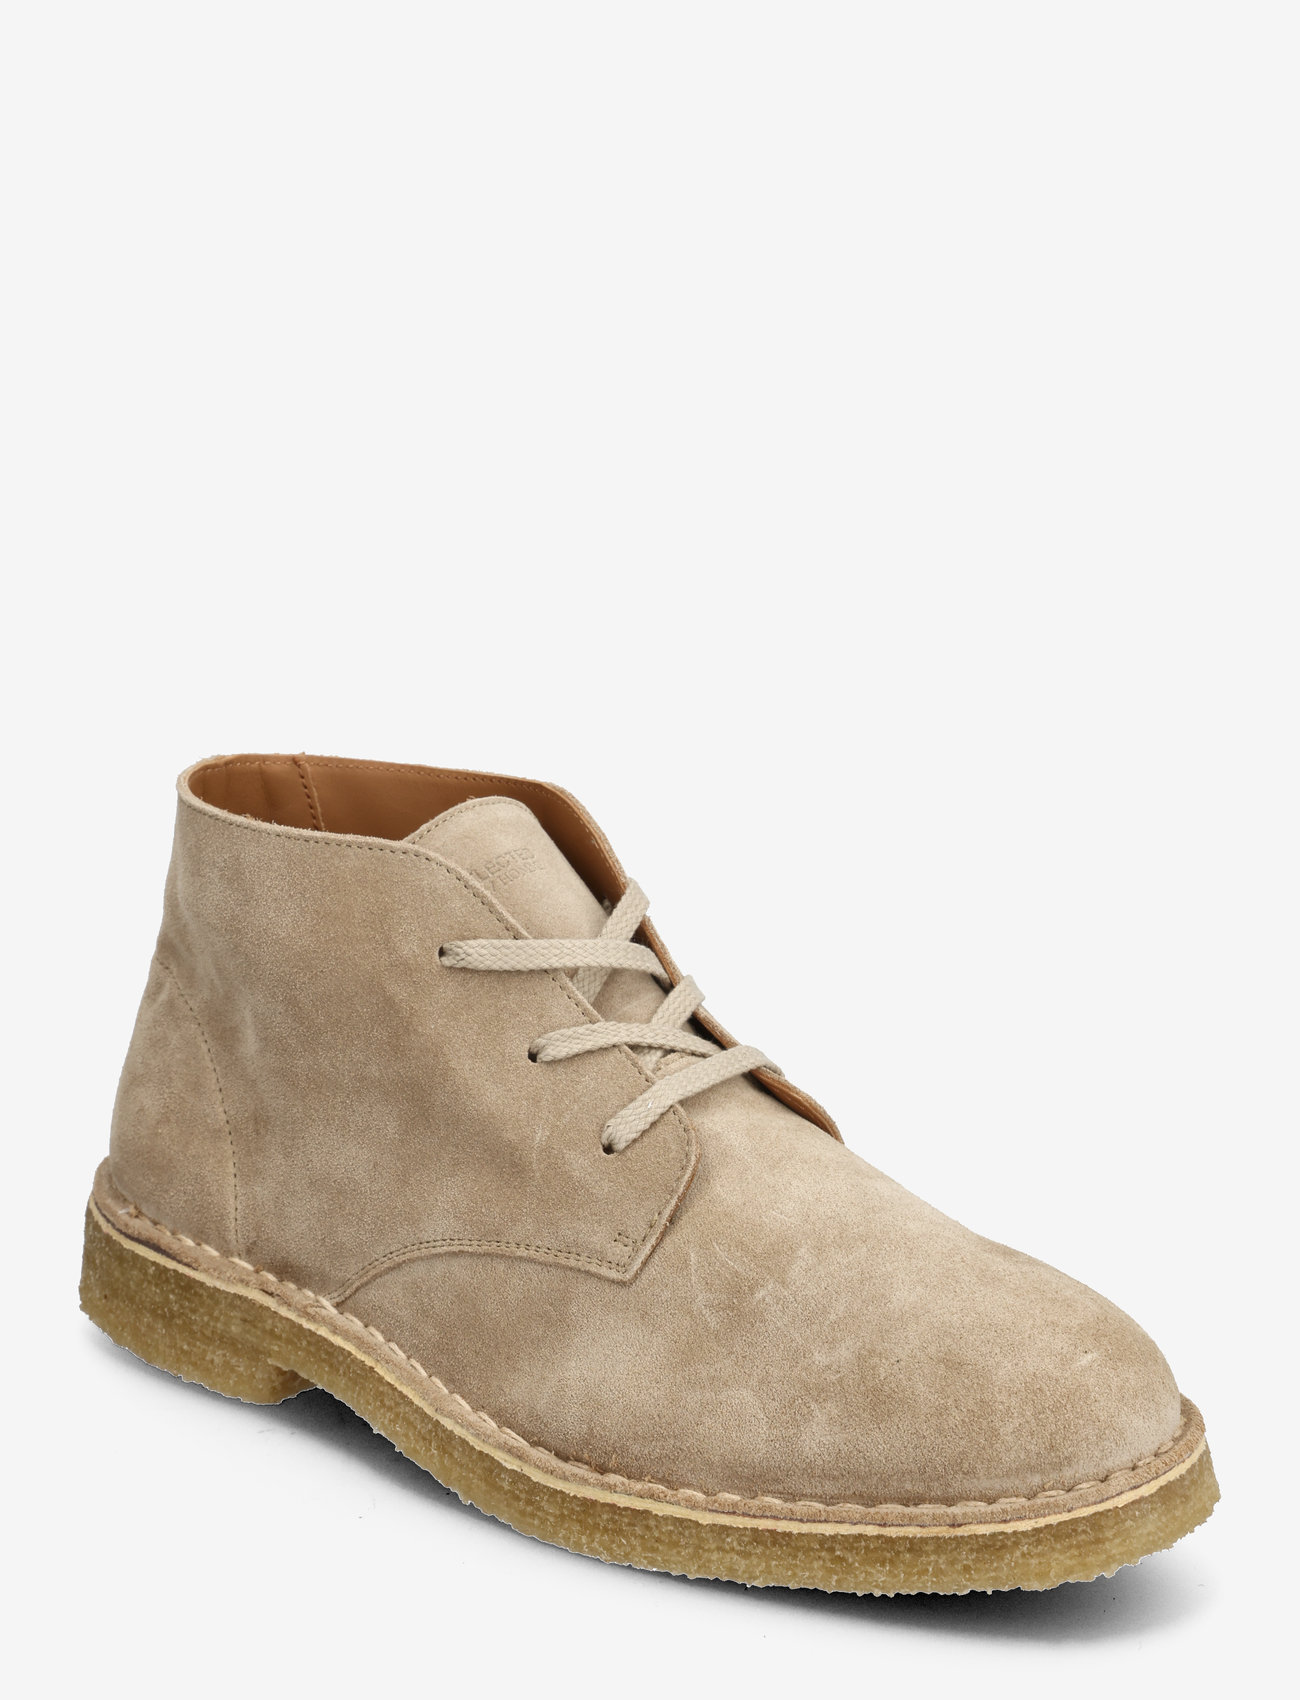 Selected Homme - SLHRICCO SUEDE CHUKKA BOOT - boots - sand - 0